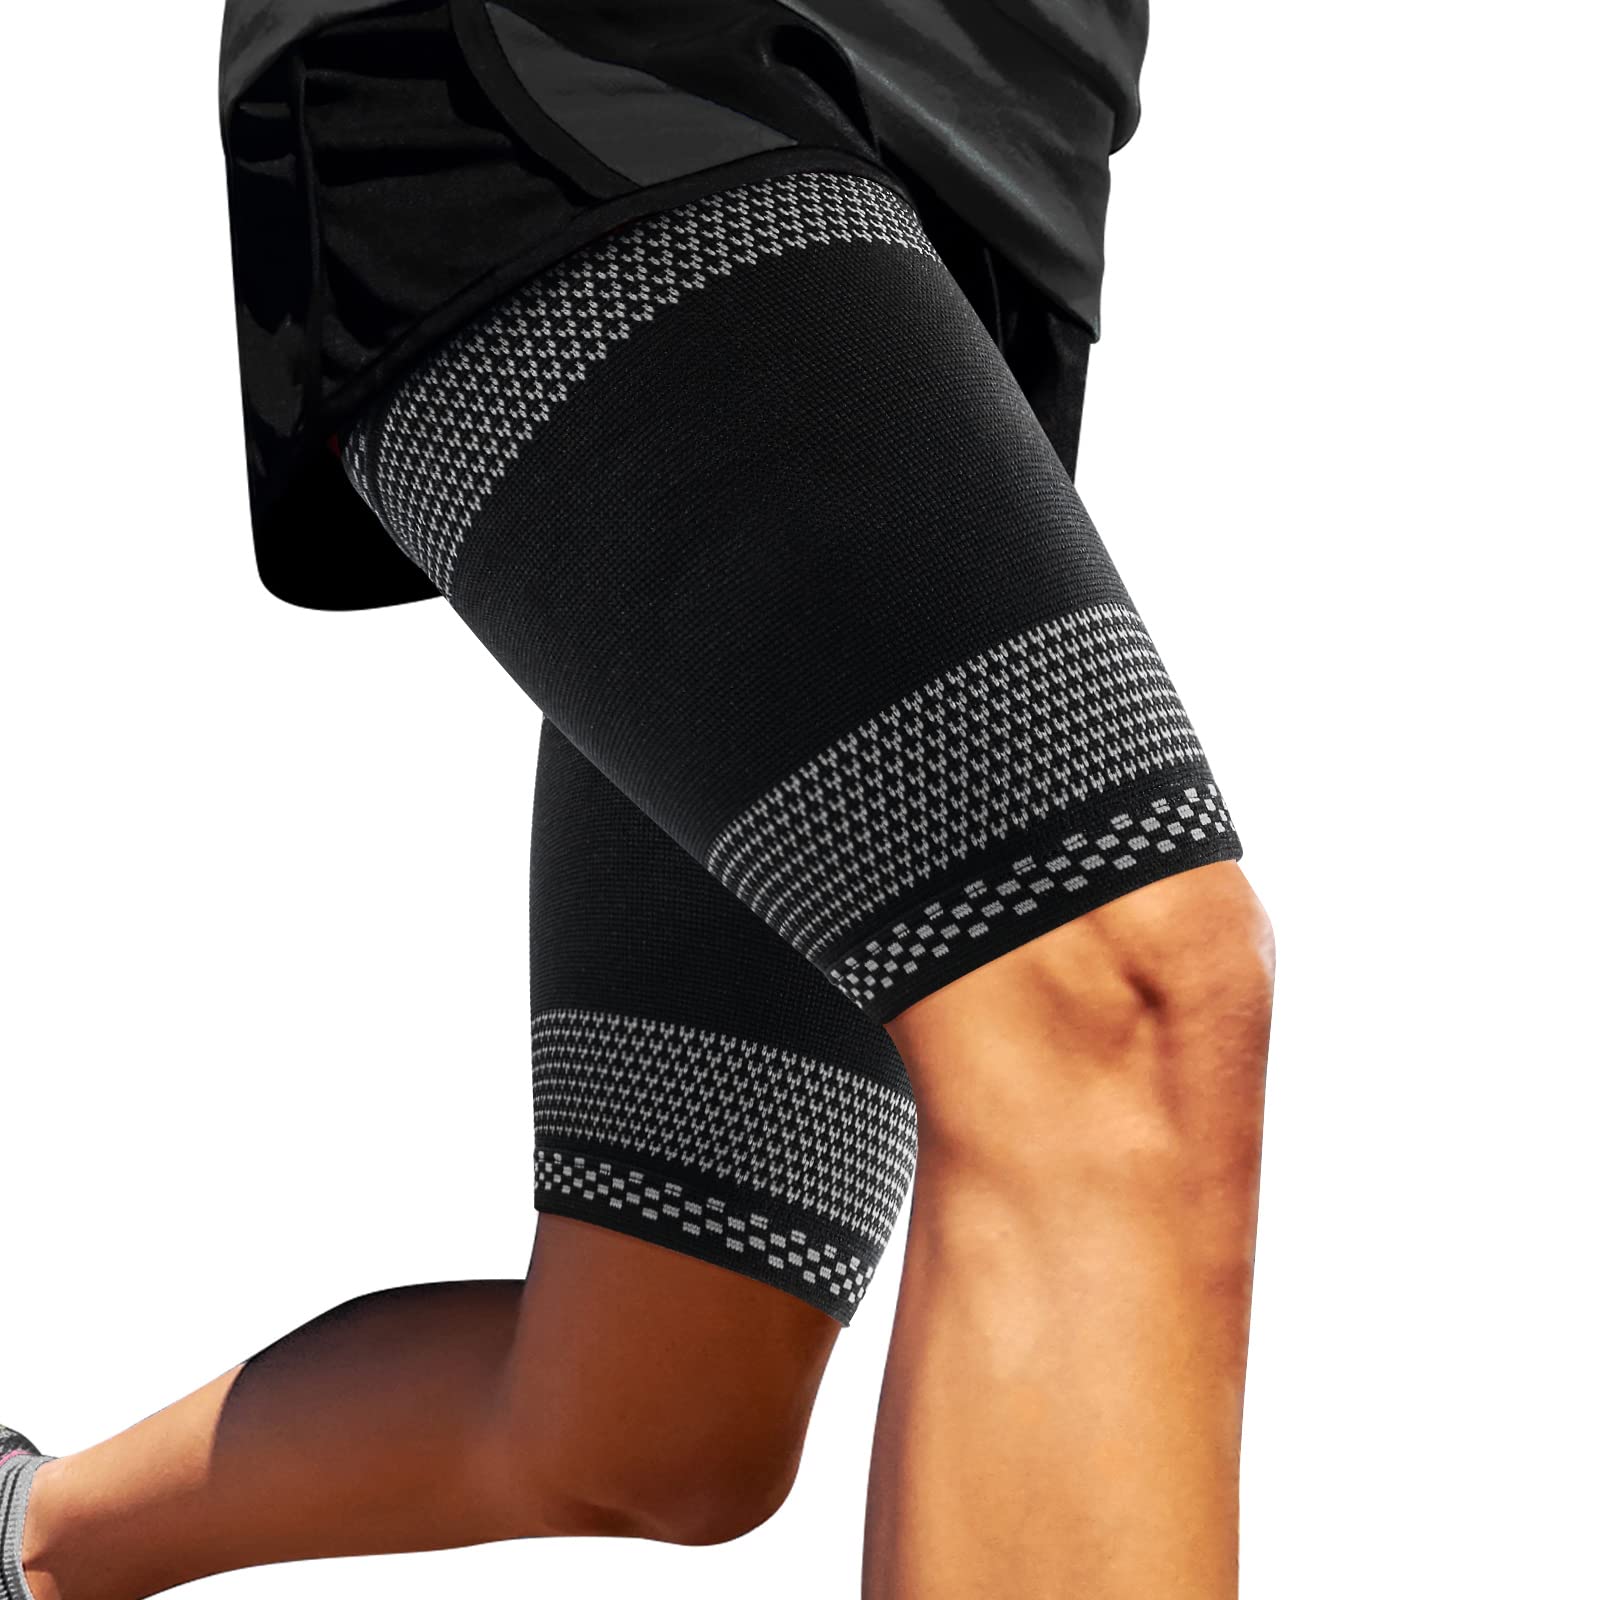 Copper Compression Thigh Support Sleeve Brace Hamstring Sport